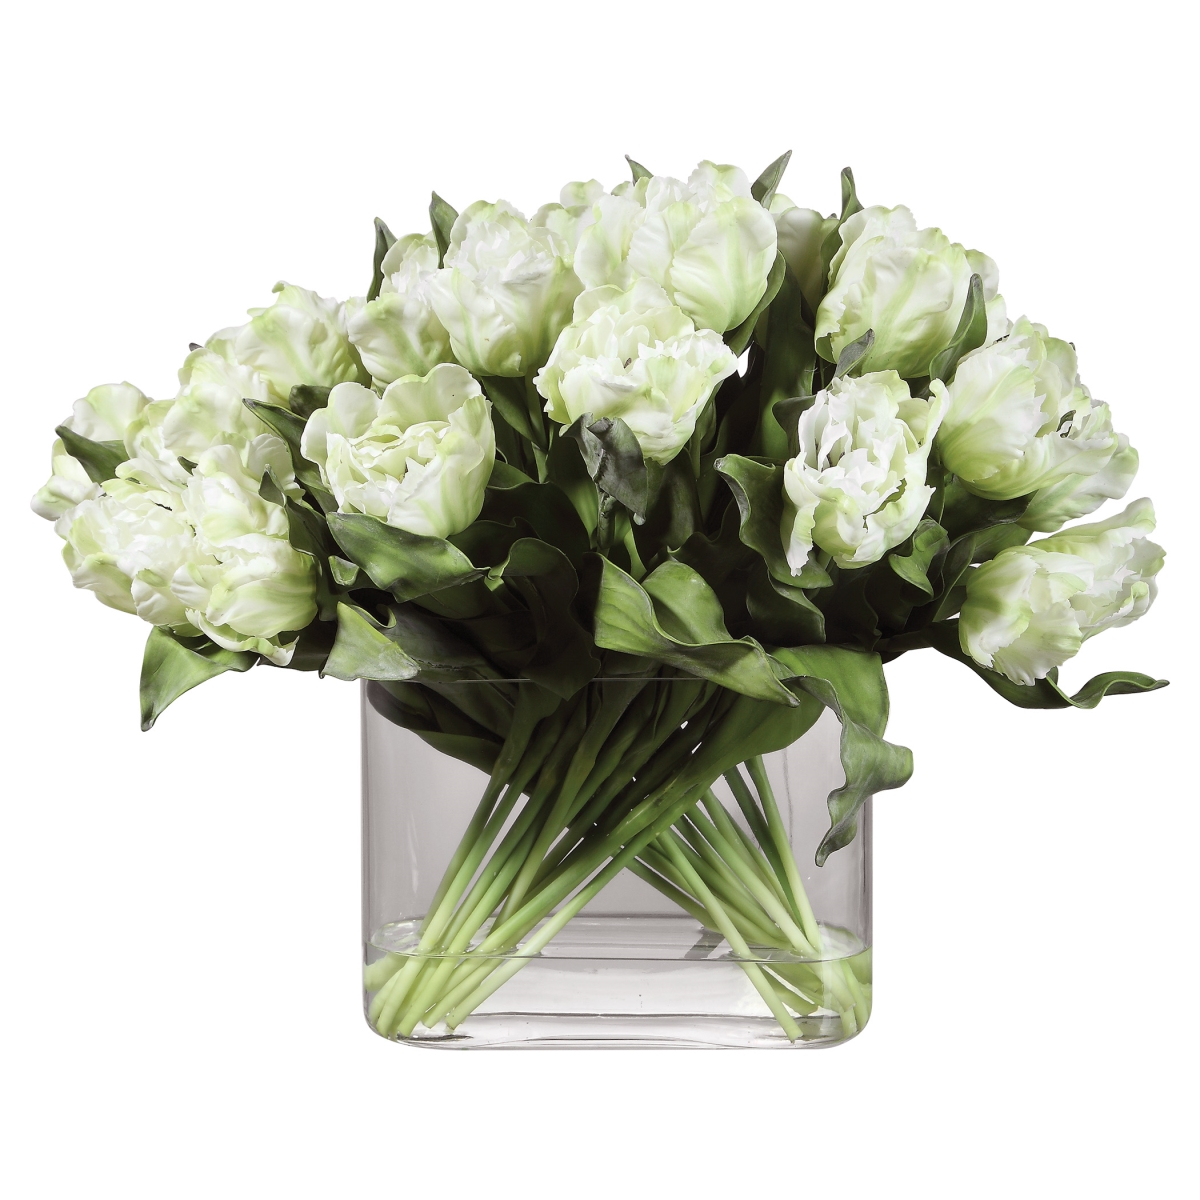 Picture of 212 Main 60156 Kimbry Tulip Centerpiece